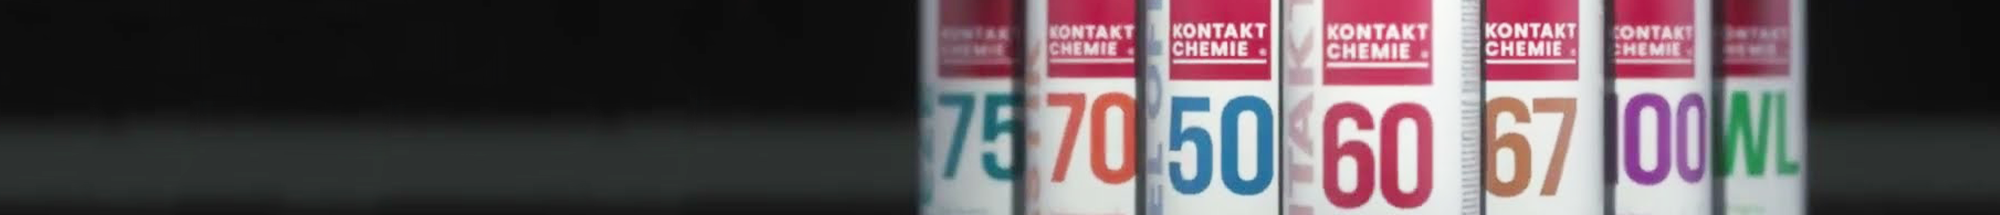 Kontakt Chemie products lined up